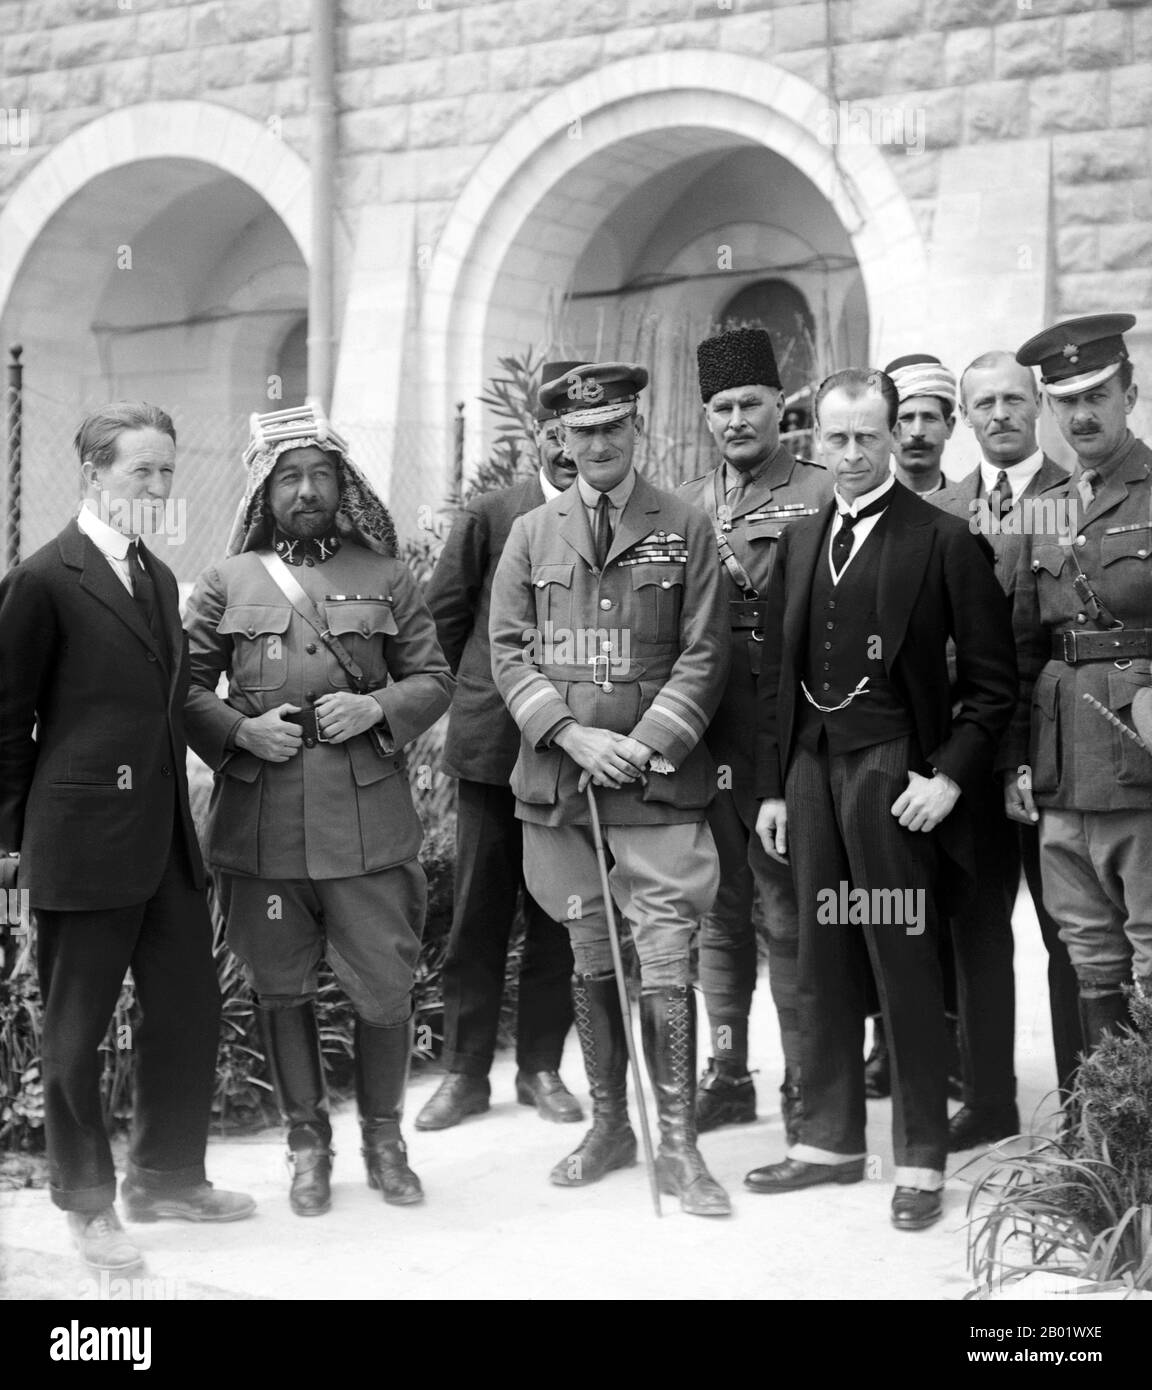 Palestine: Lt Col T. E. Lawrence, Emir Abdullah I and General Edmund Allenby in Jerusalem, 1 January 1921  Abdullah I bin al-Hussein (February 1882 – 20 July 1951), King of Jordan, was the second of three sons of Sherif Hussein bin Ali, Sharif and Emir of Mecca.  Lieutenant Colonel Thomas Edward Lawrence, CB, DSO (16 August 1888 - 19 May 1935), known professionally as T. E. Lawrence, was a British Army officer renowned especially for his liaison role during the Arab Revolt against Ottoman Turkish rule. Stock Photo